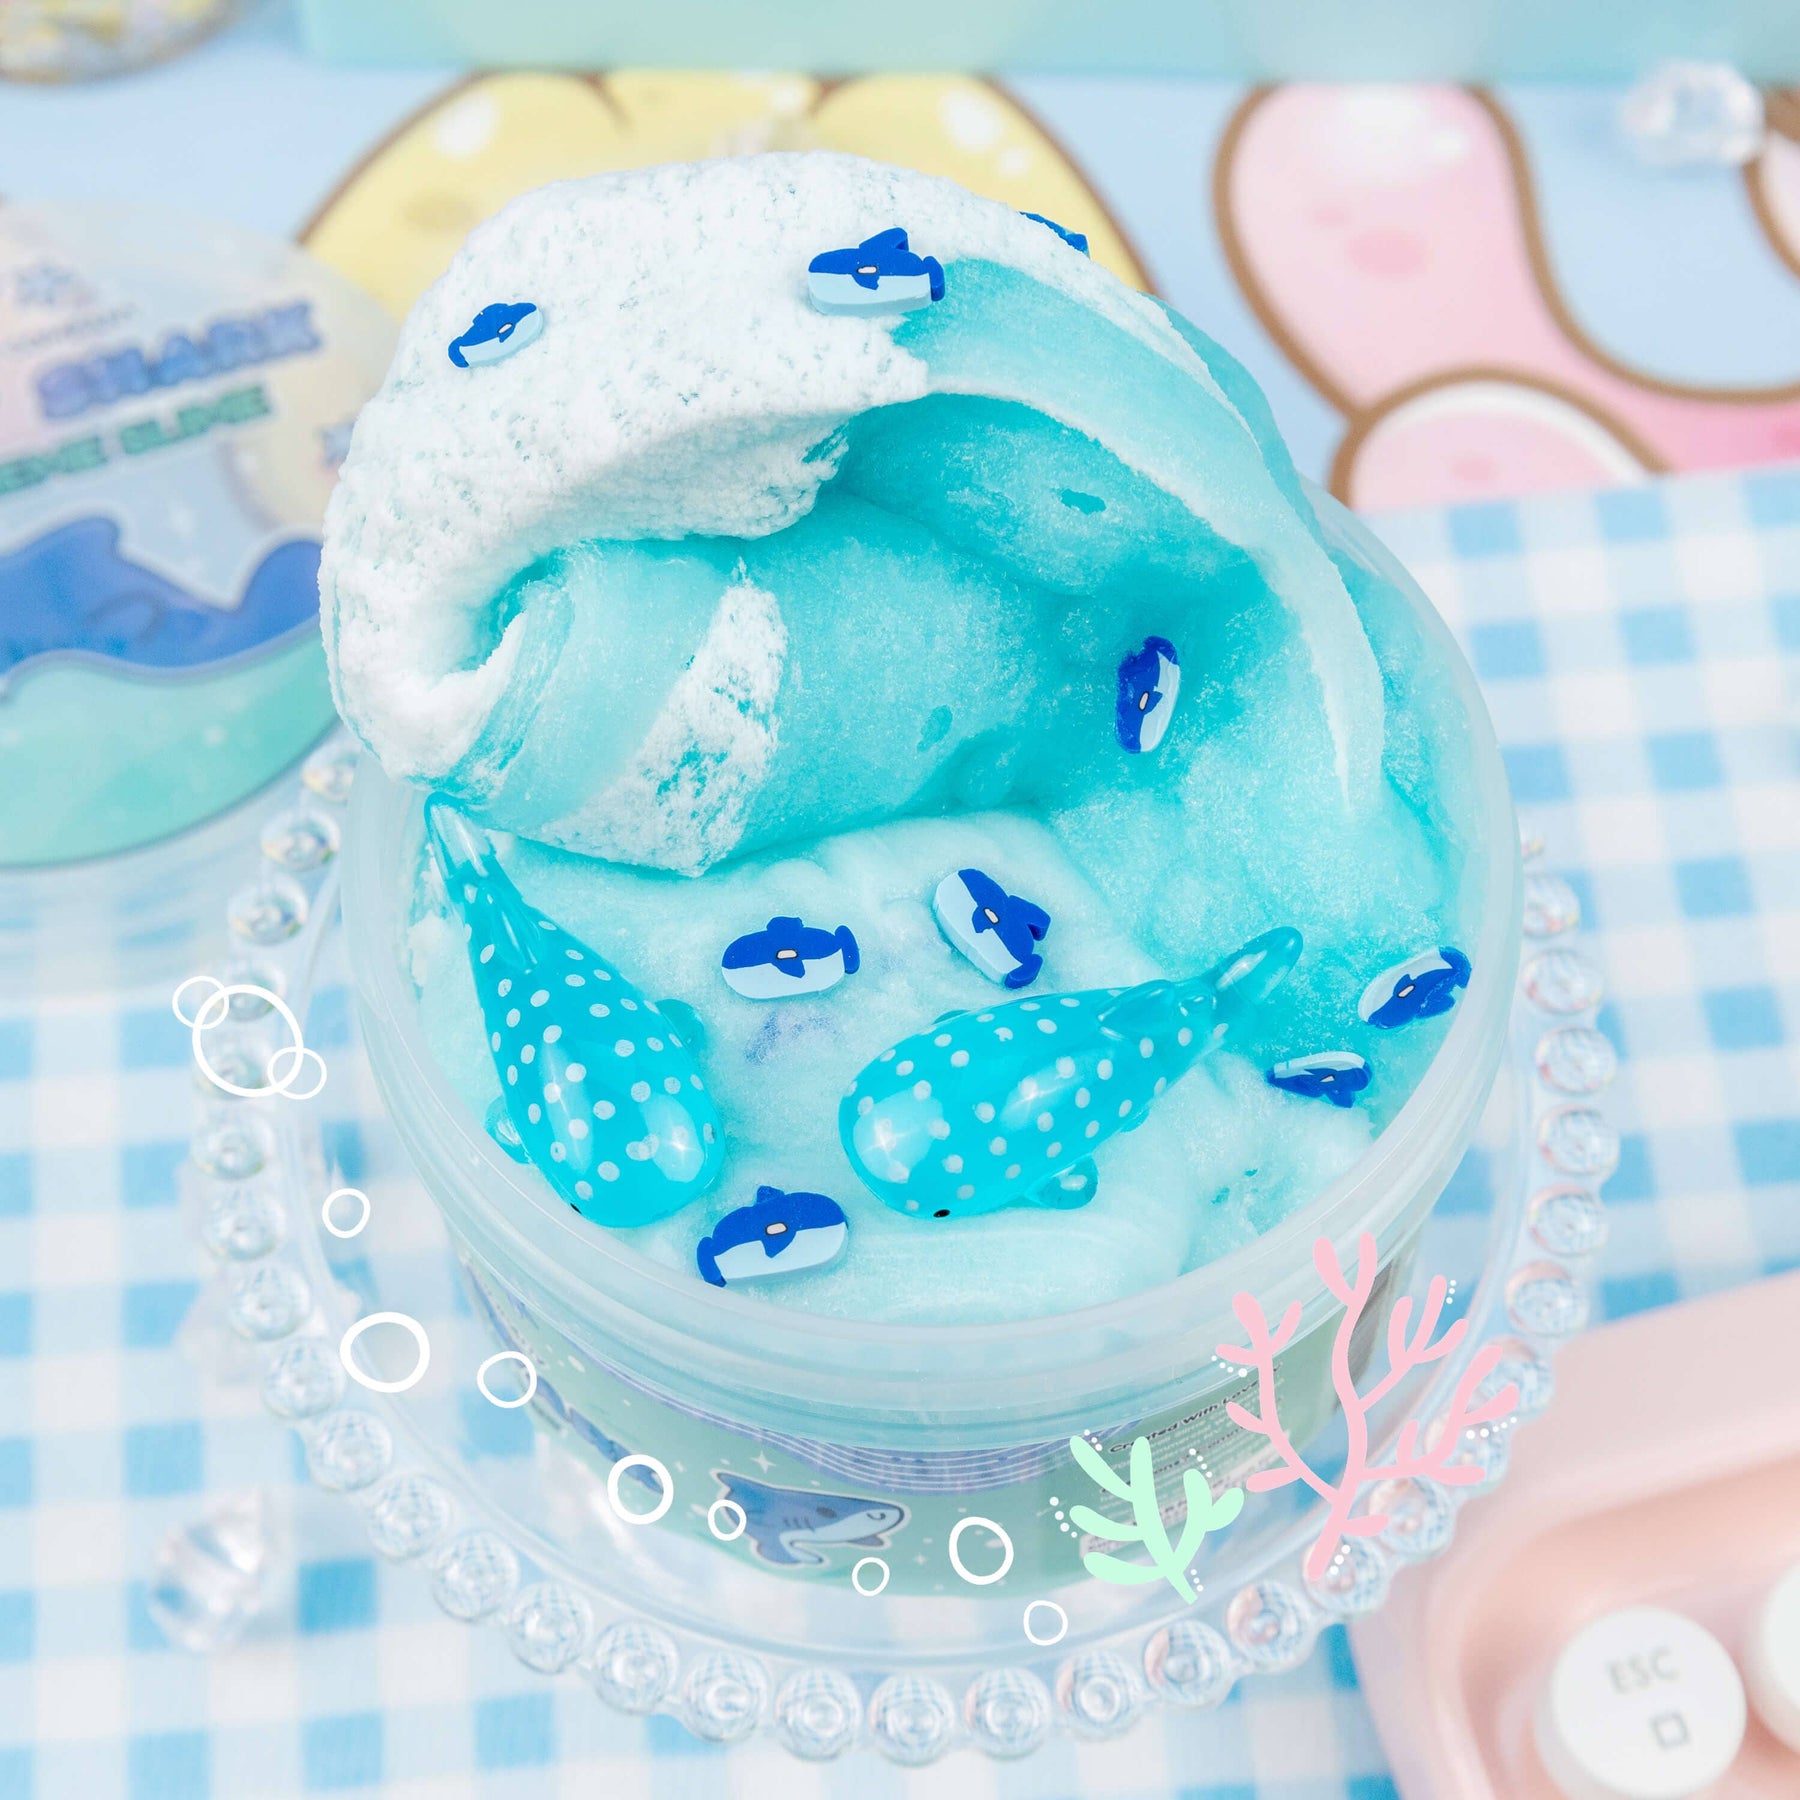 A blue and white Gummy Shark Jelly Creme Slime with shark fimo slices and whale shark charms, creating hypnotic swirls reminiscent of sea foam.